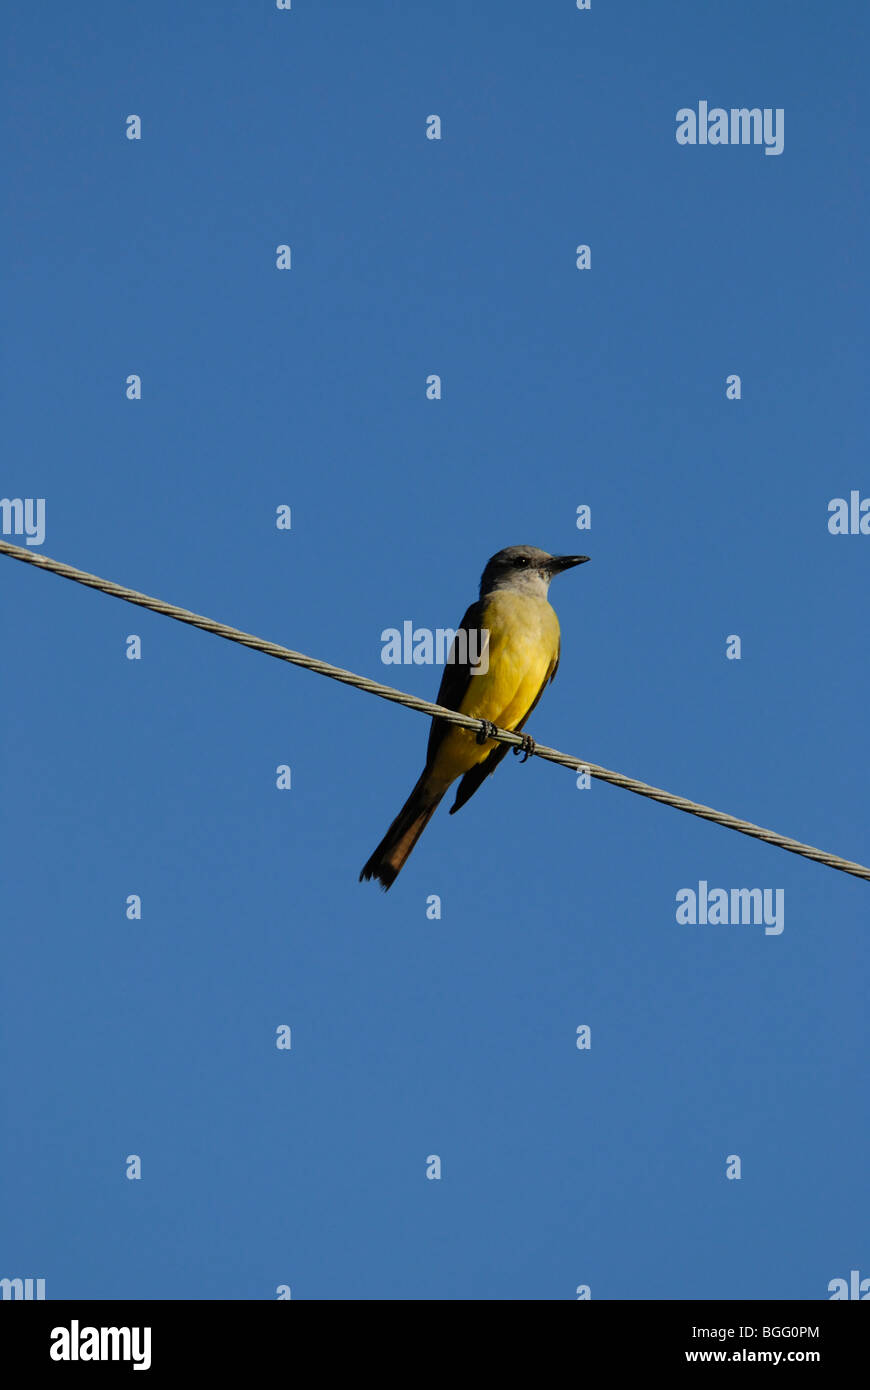 Tropical Kingbird (Tyrannus m. melancholicus ) on wire cable looking forward Stock Photo